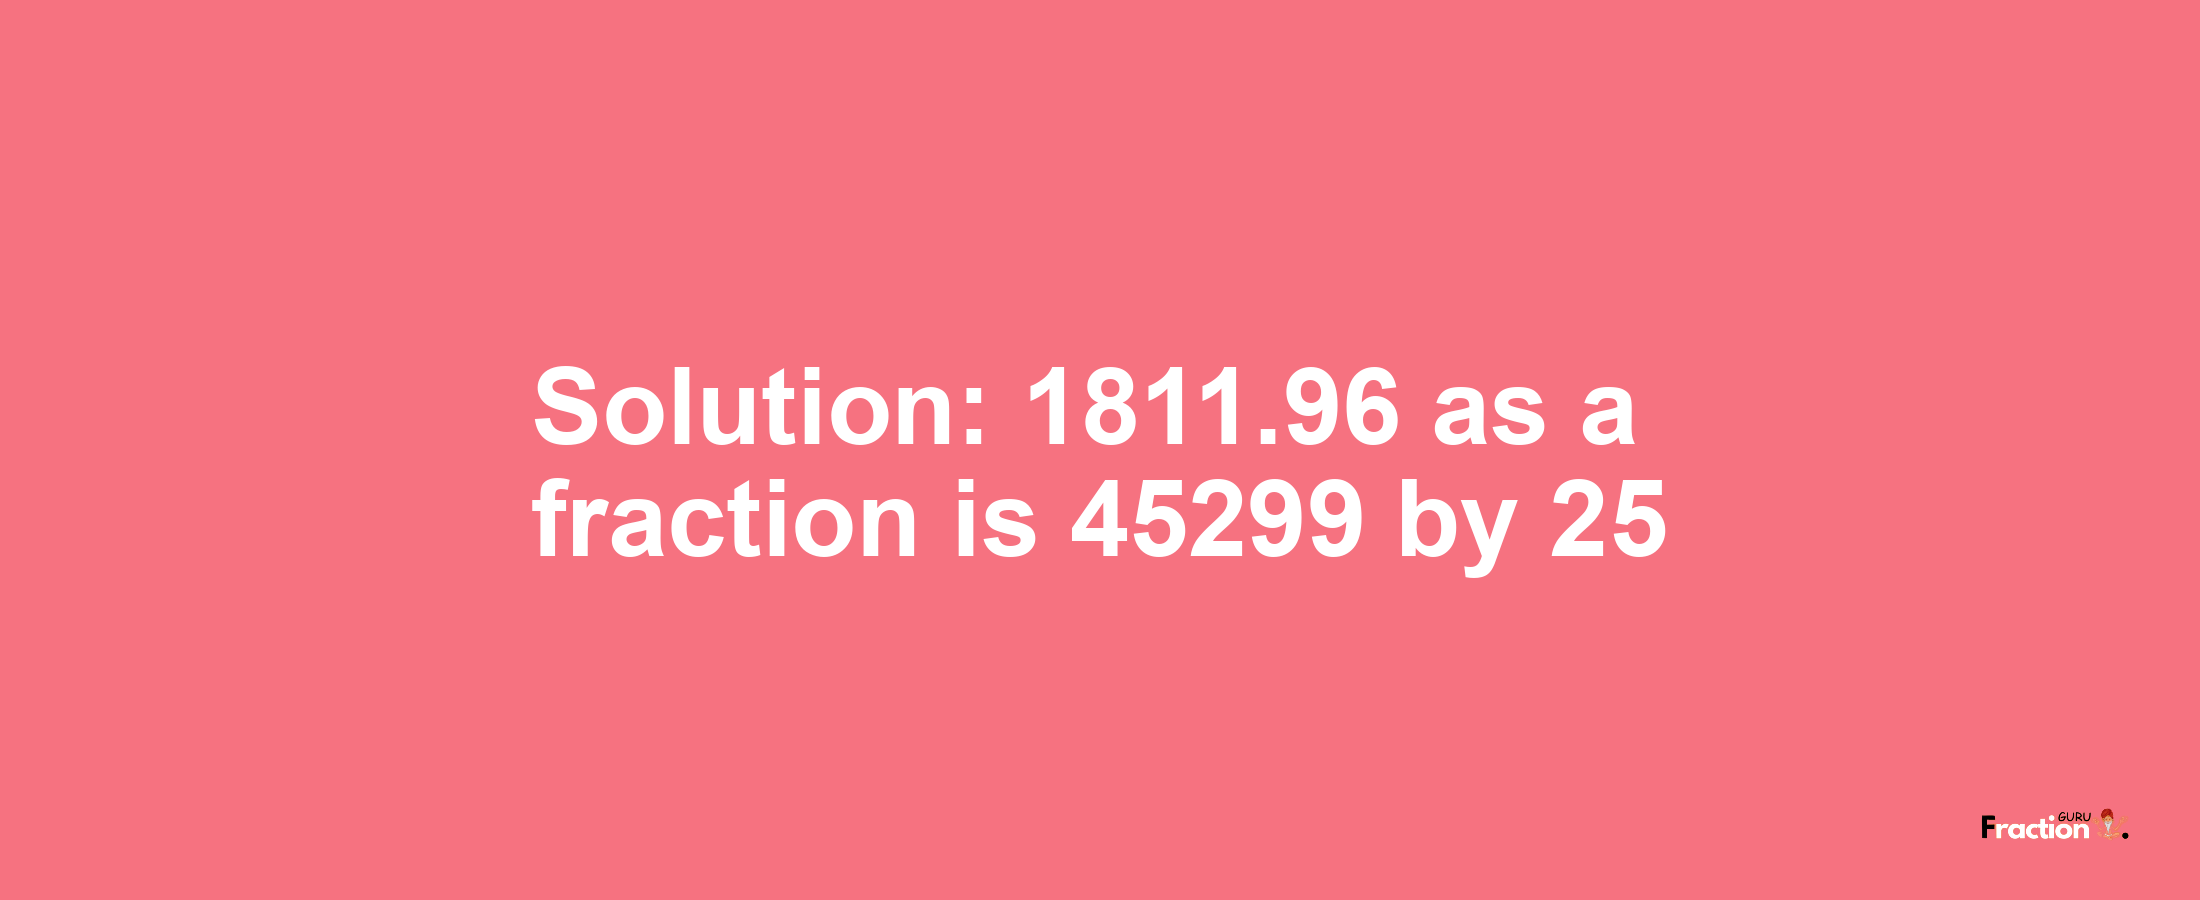 Solution:1811.96 as a fraction is 45299/25